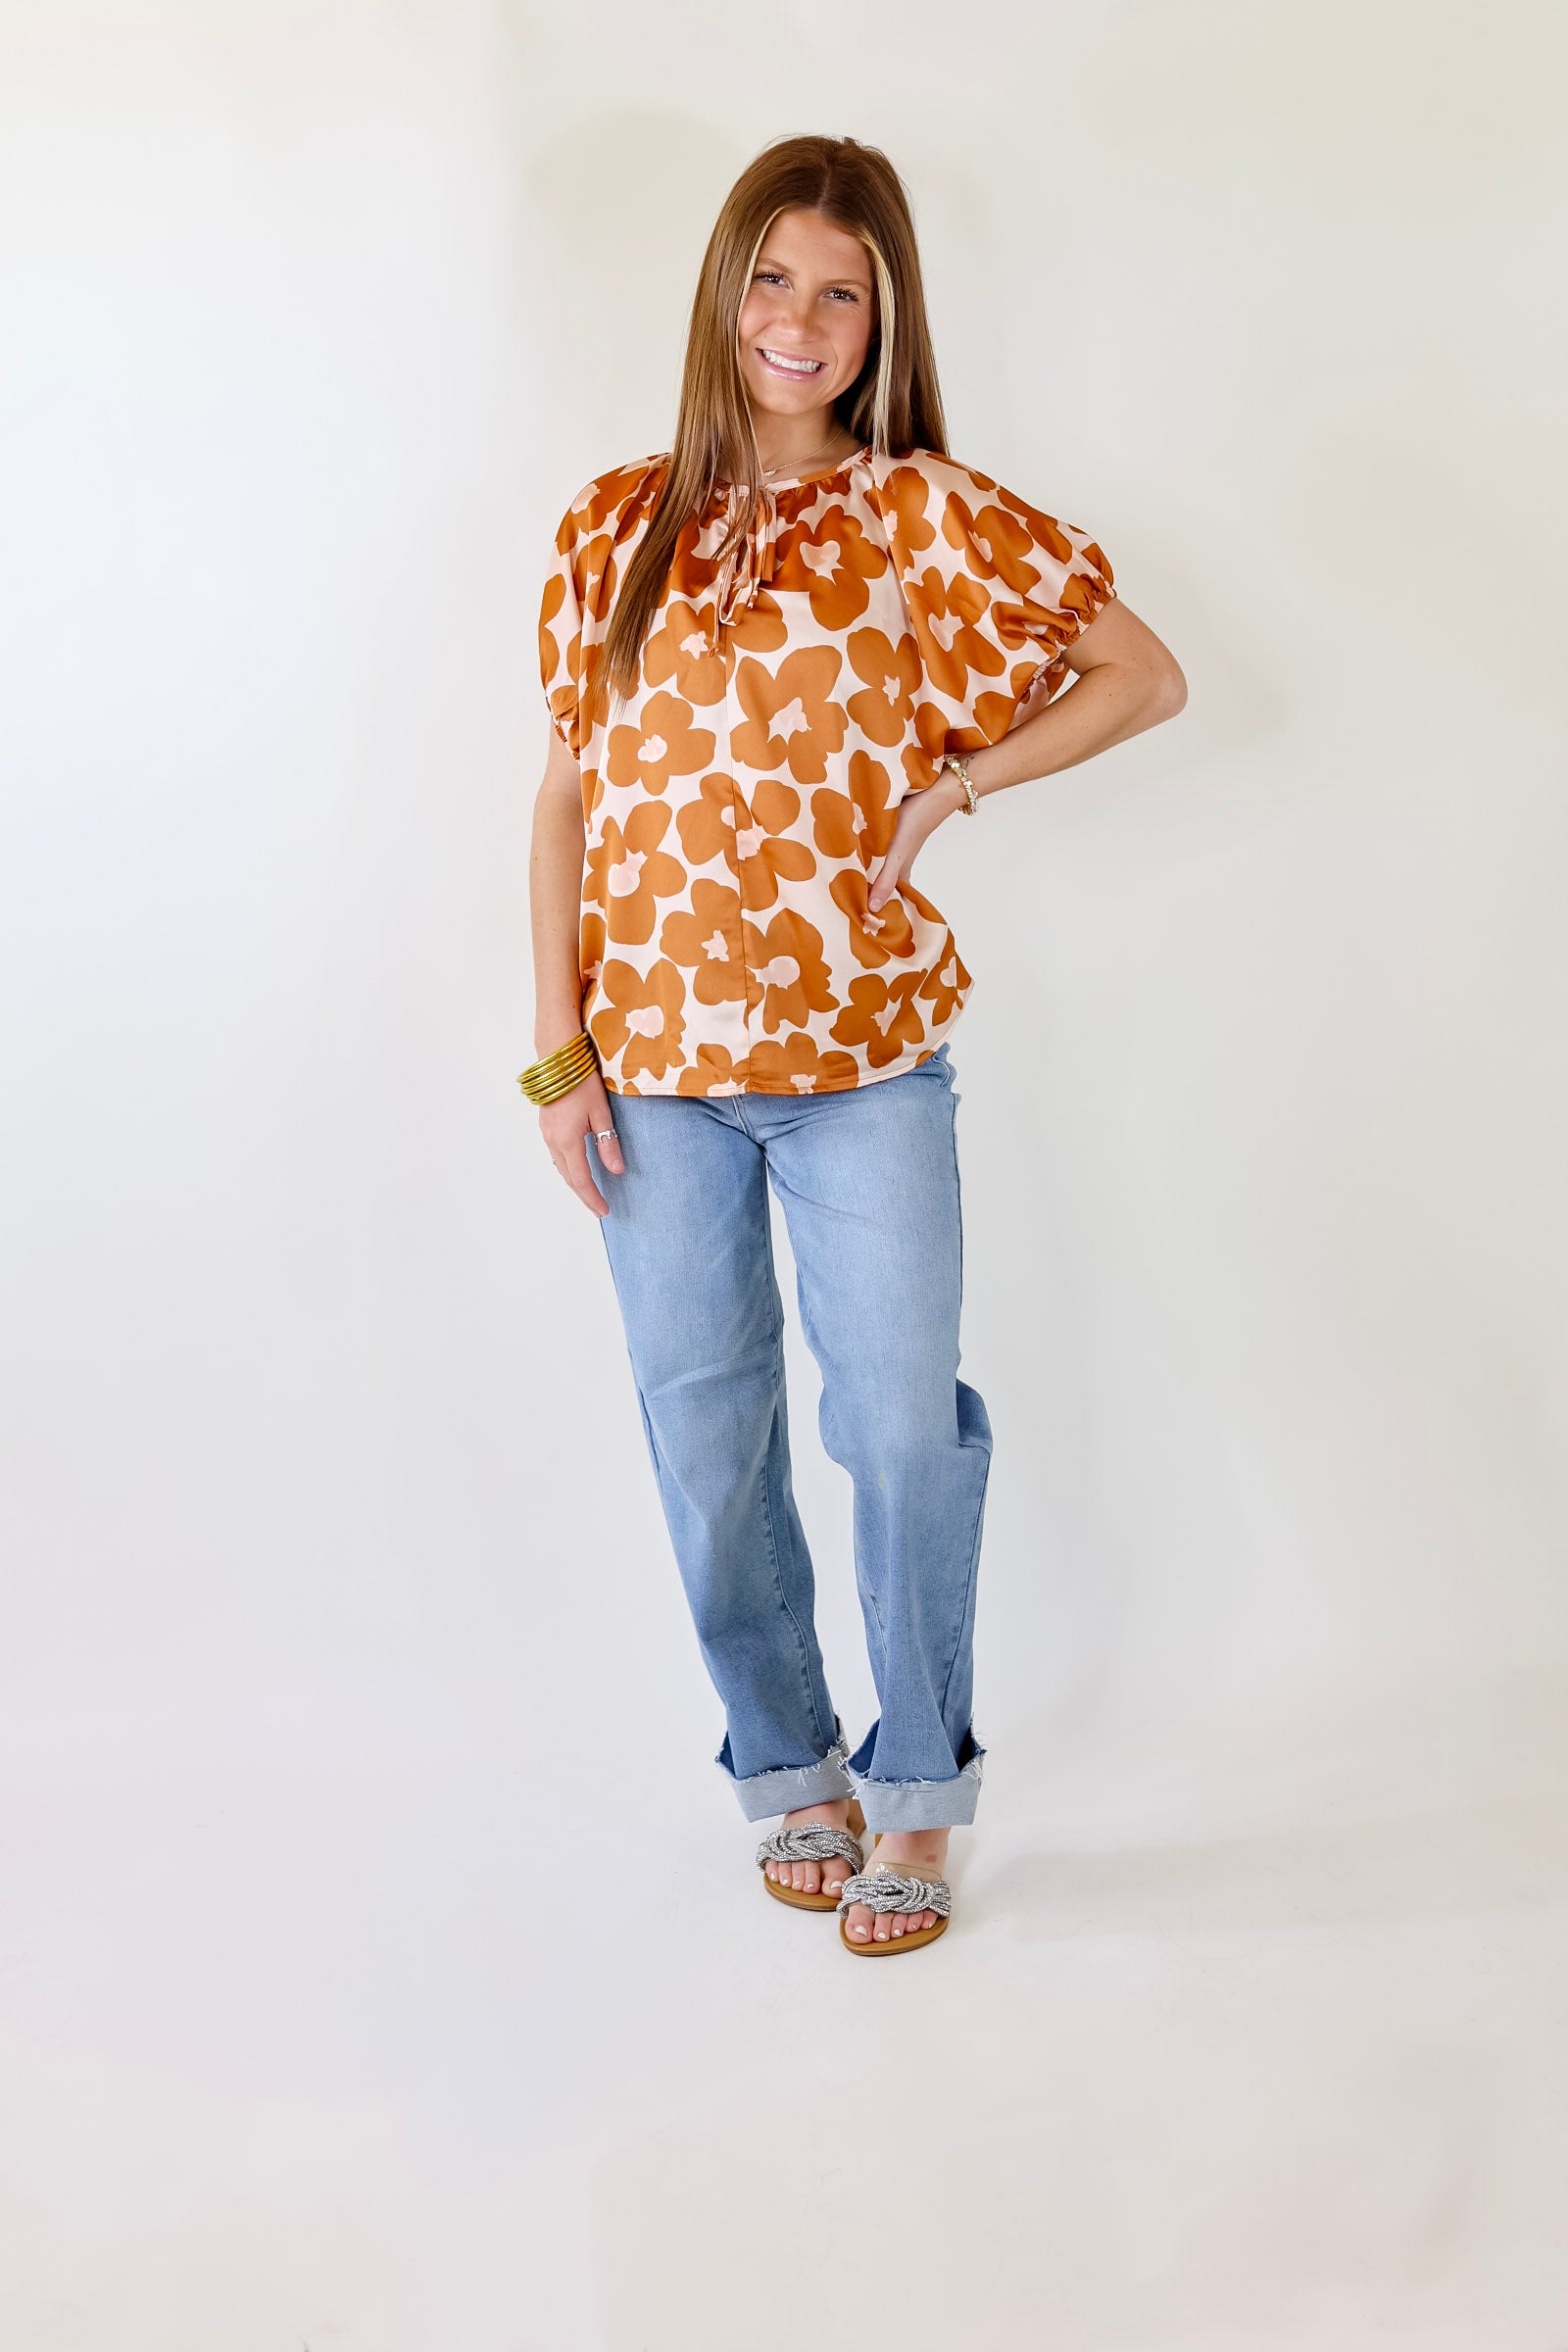 Counting Kisses Short Sleeve Floral Top with Keyhole in Copper - Giddy Up Glamour Boutique